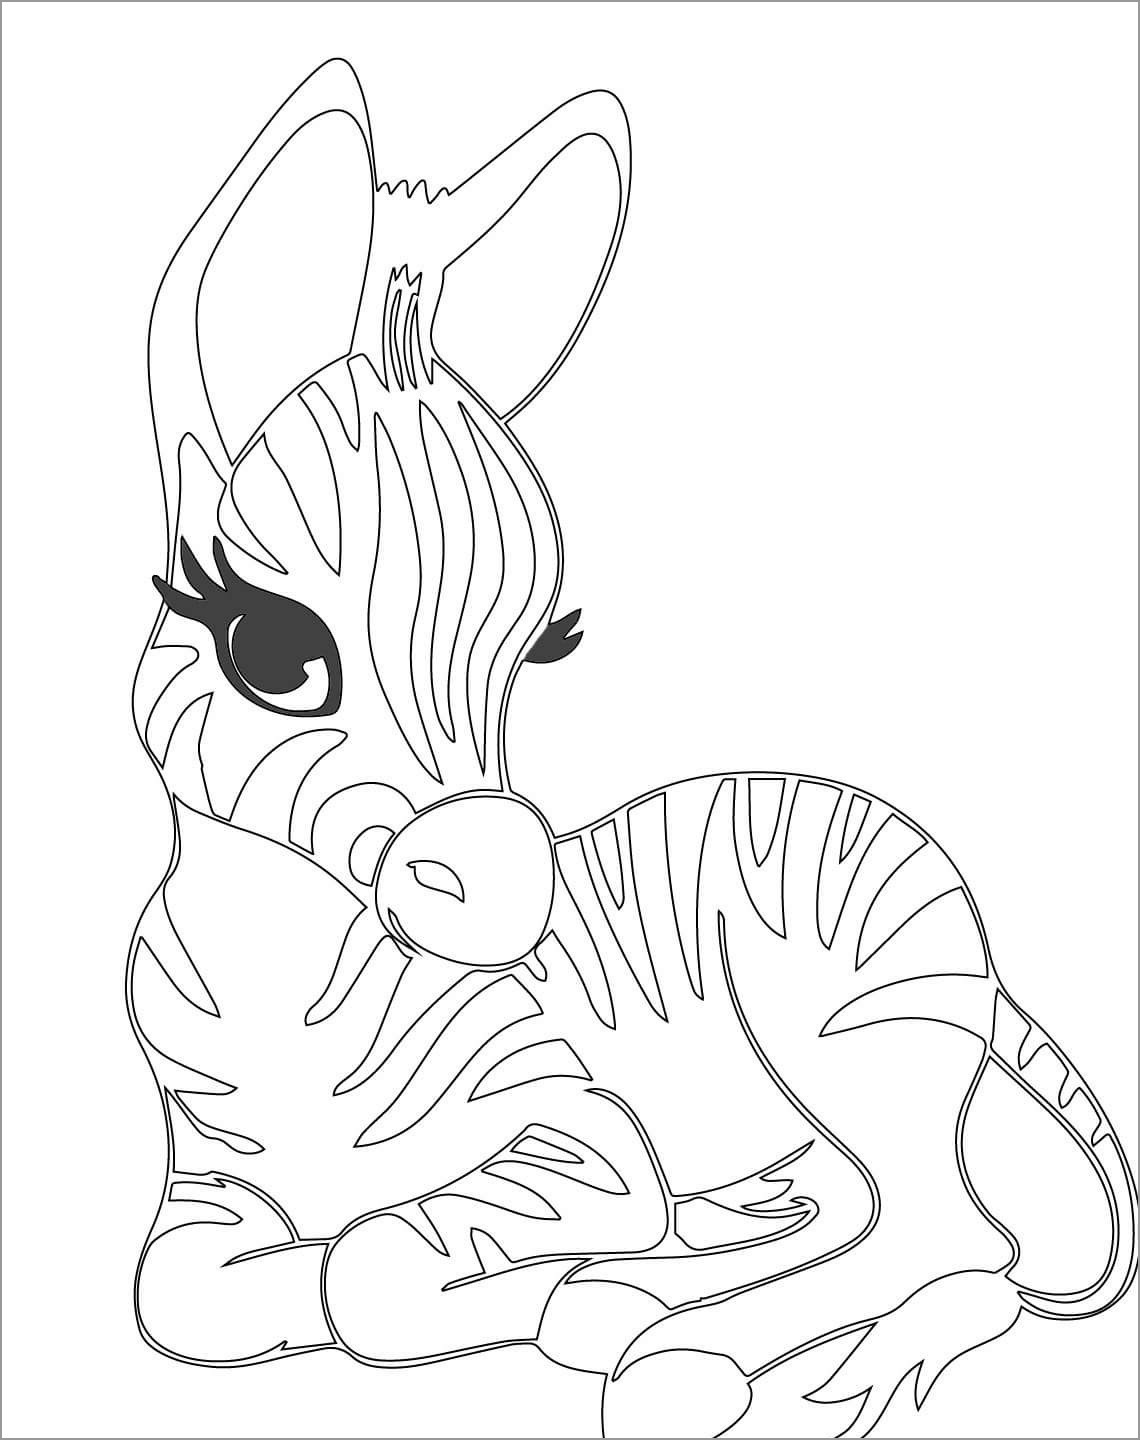 Cute Baby Zebra Coloring Page for Kids